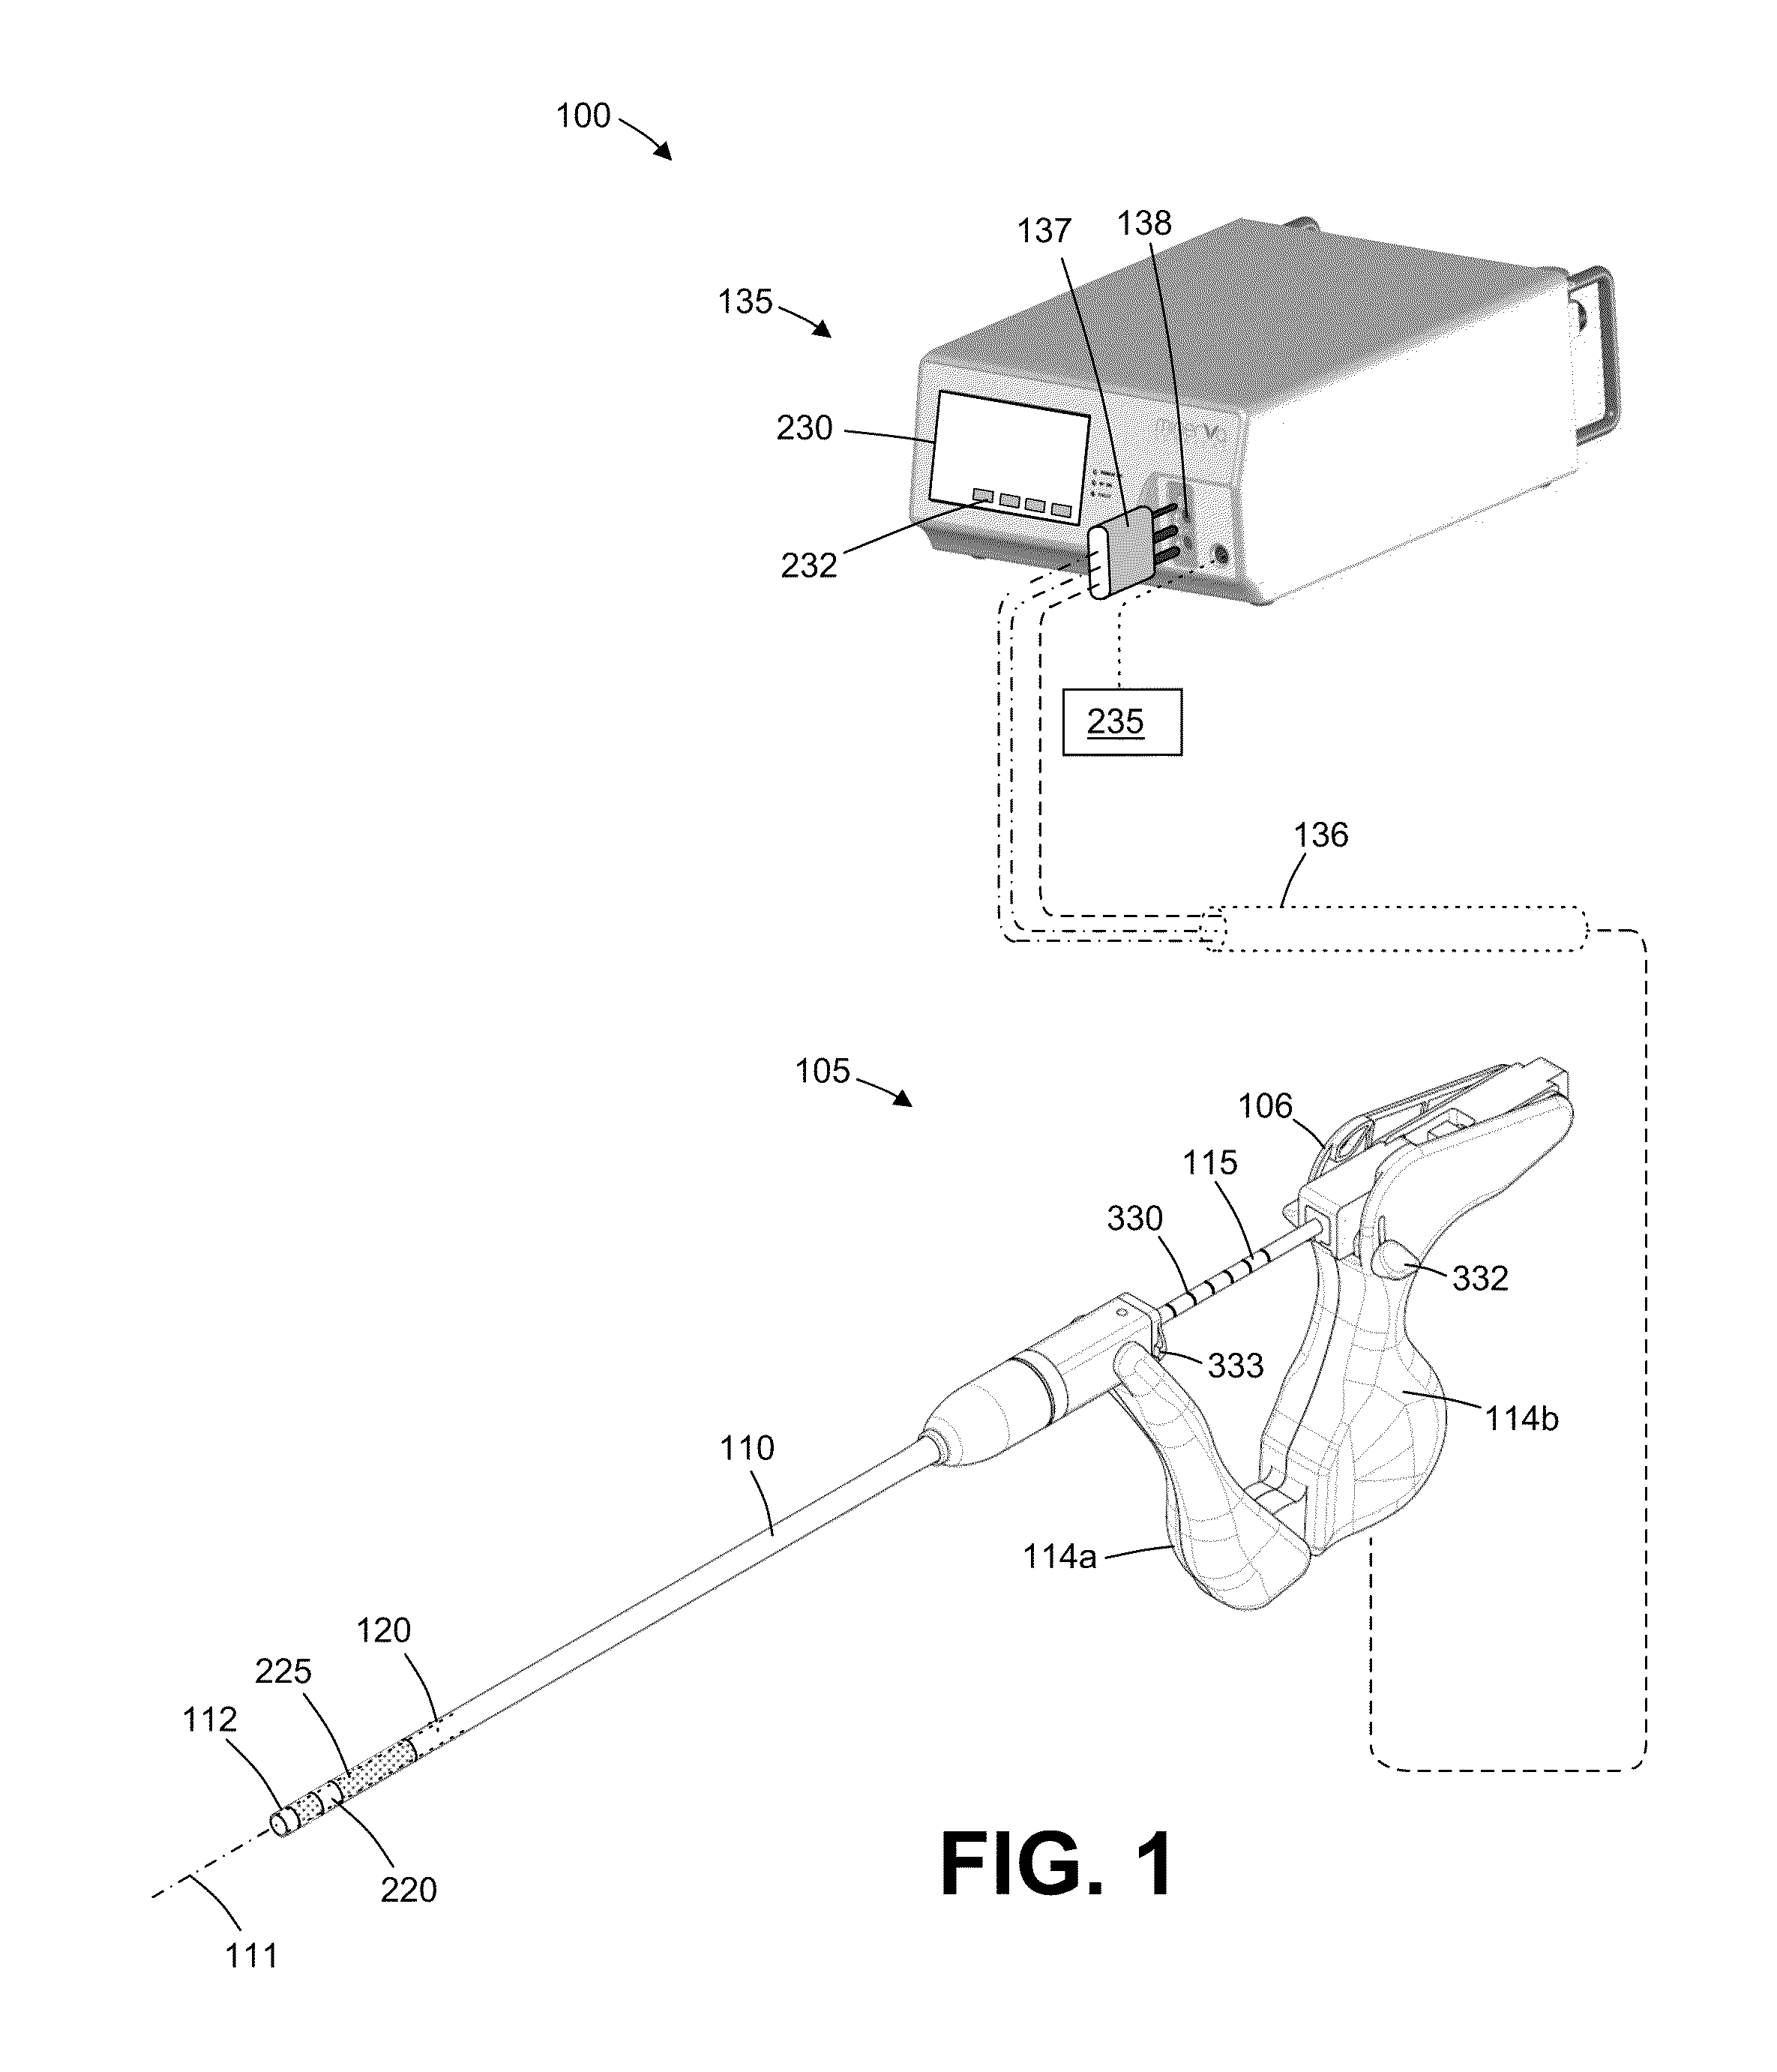 Systems and devices for evaluating the integrity of a uterine cavity